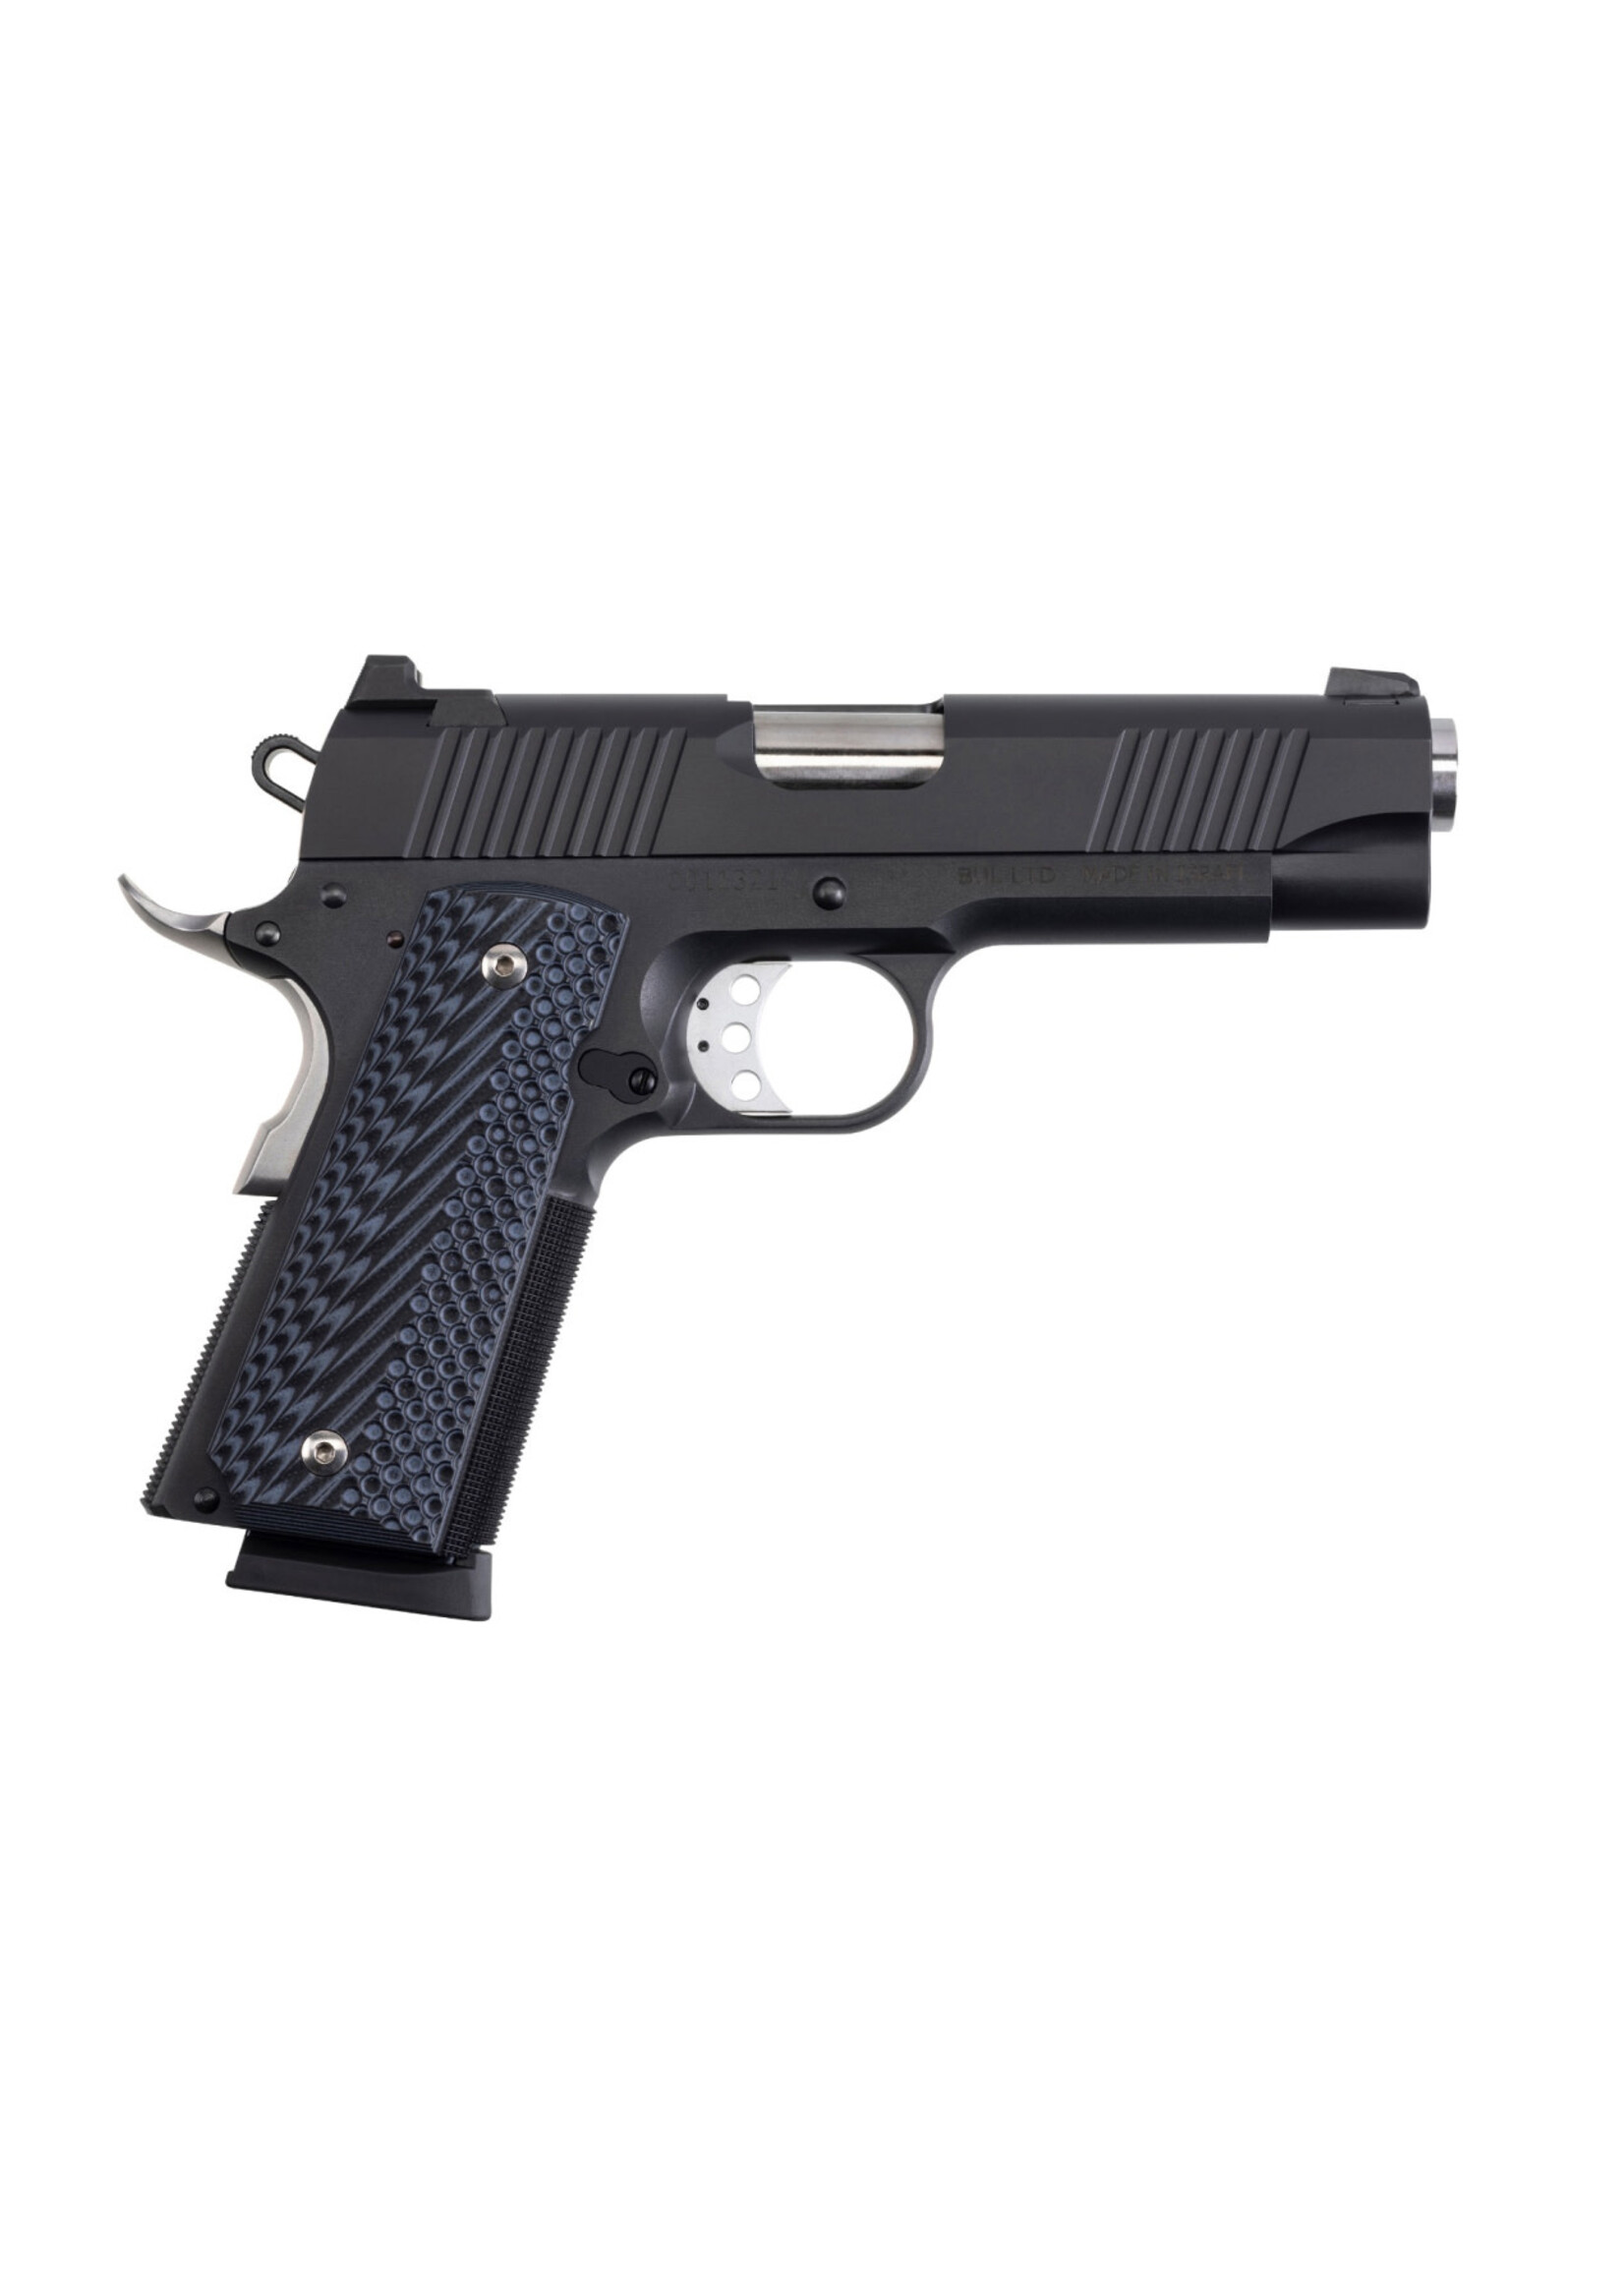 Magnum Research Magnum Research, 1911C, 1911, Semi-automatic, Metal Frame Pistol, Commander, 45 ACP, 4.33" Barrel, Steel, Black, G10 Grips, Fixed Sights, 8 Rounds, 2 Magazines